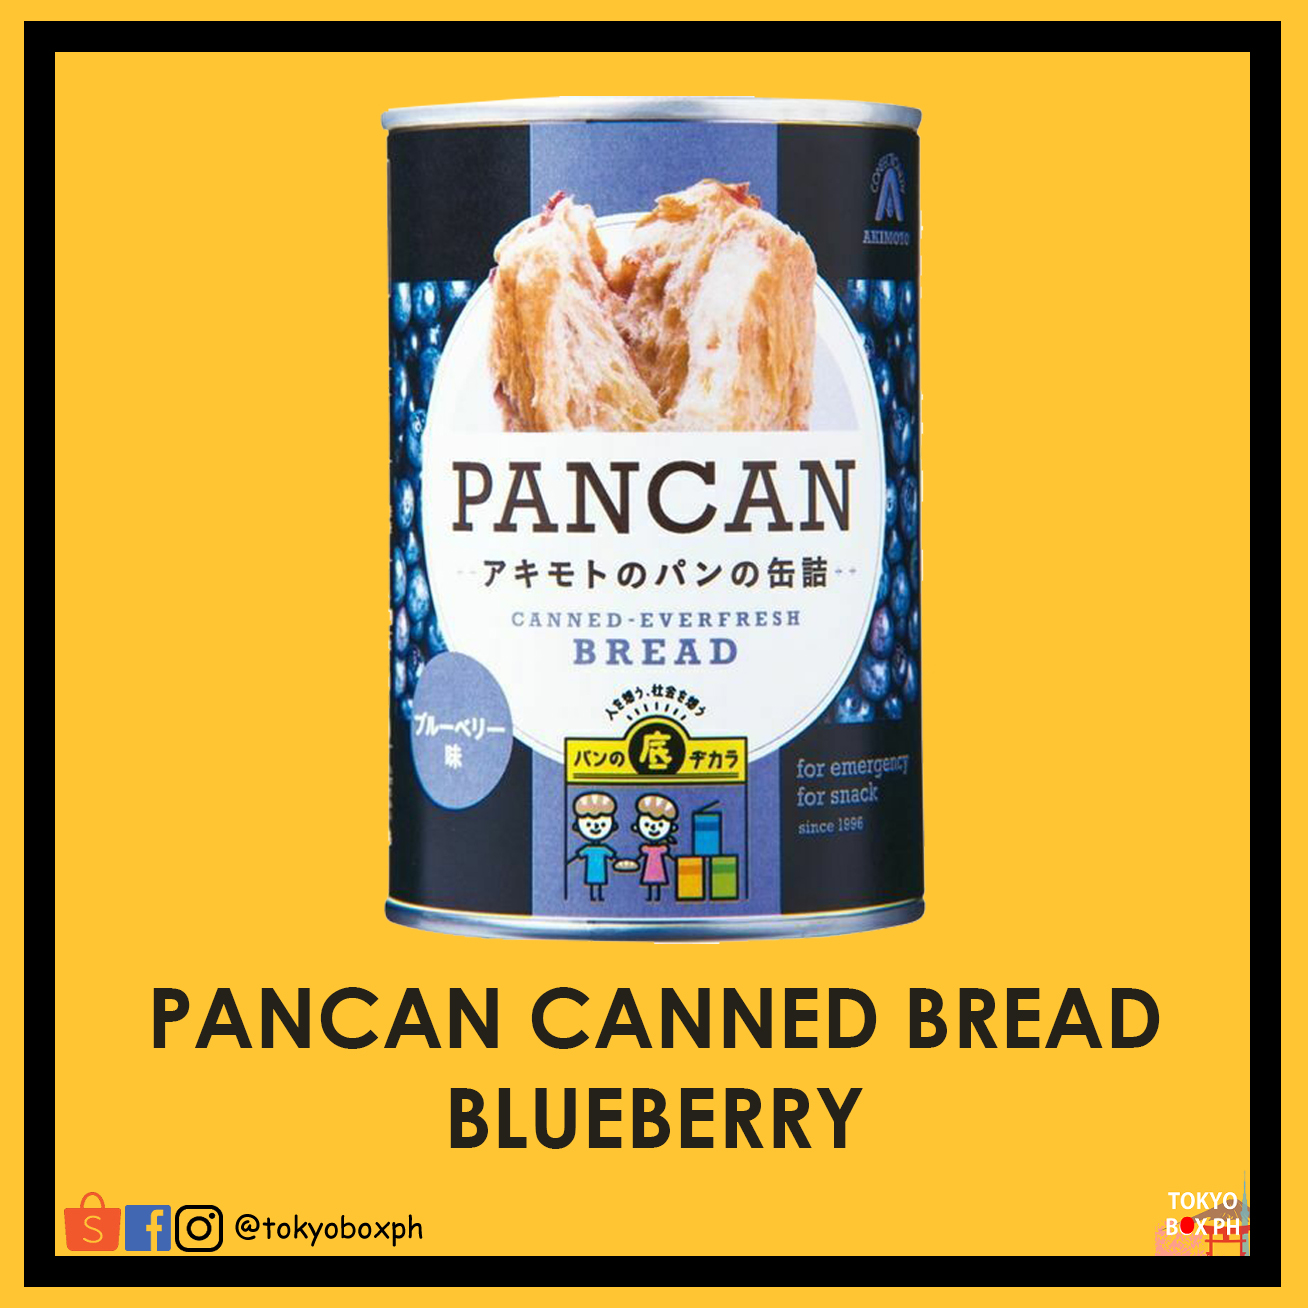 orange strawberry Bread Akimoto PANCAN Canned bread 6 cans set blueberry 